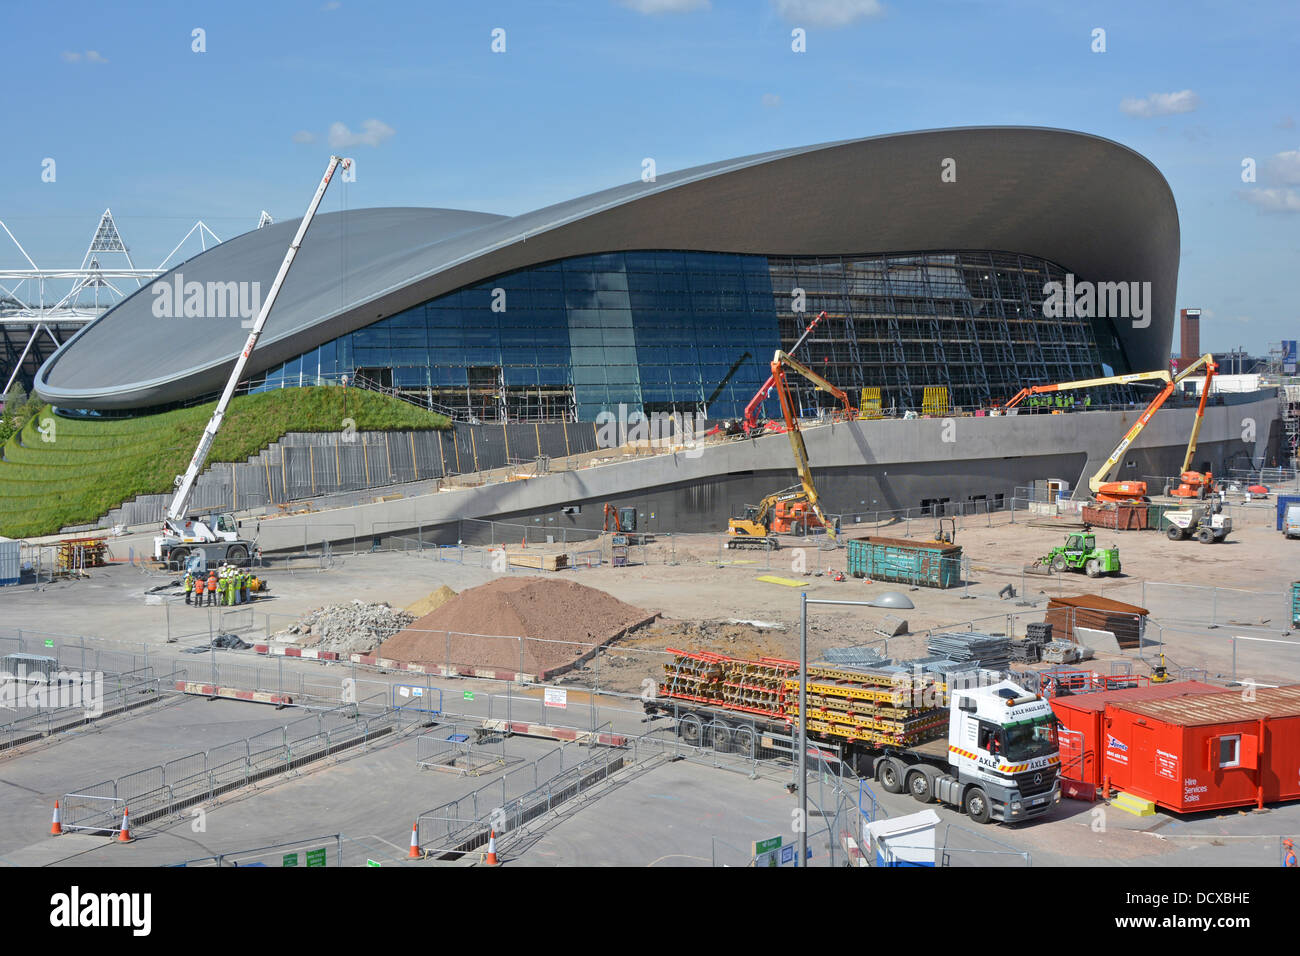 Queen Elizabeth Olympic Park futuristic Aquatic Centre removal of temporary stands showing installation of new side walls Stratford East London UK Stock Photo